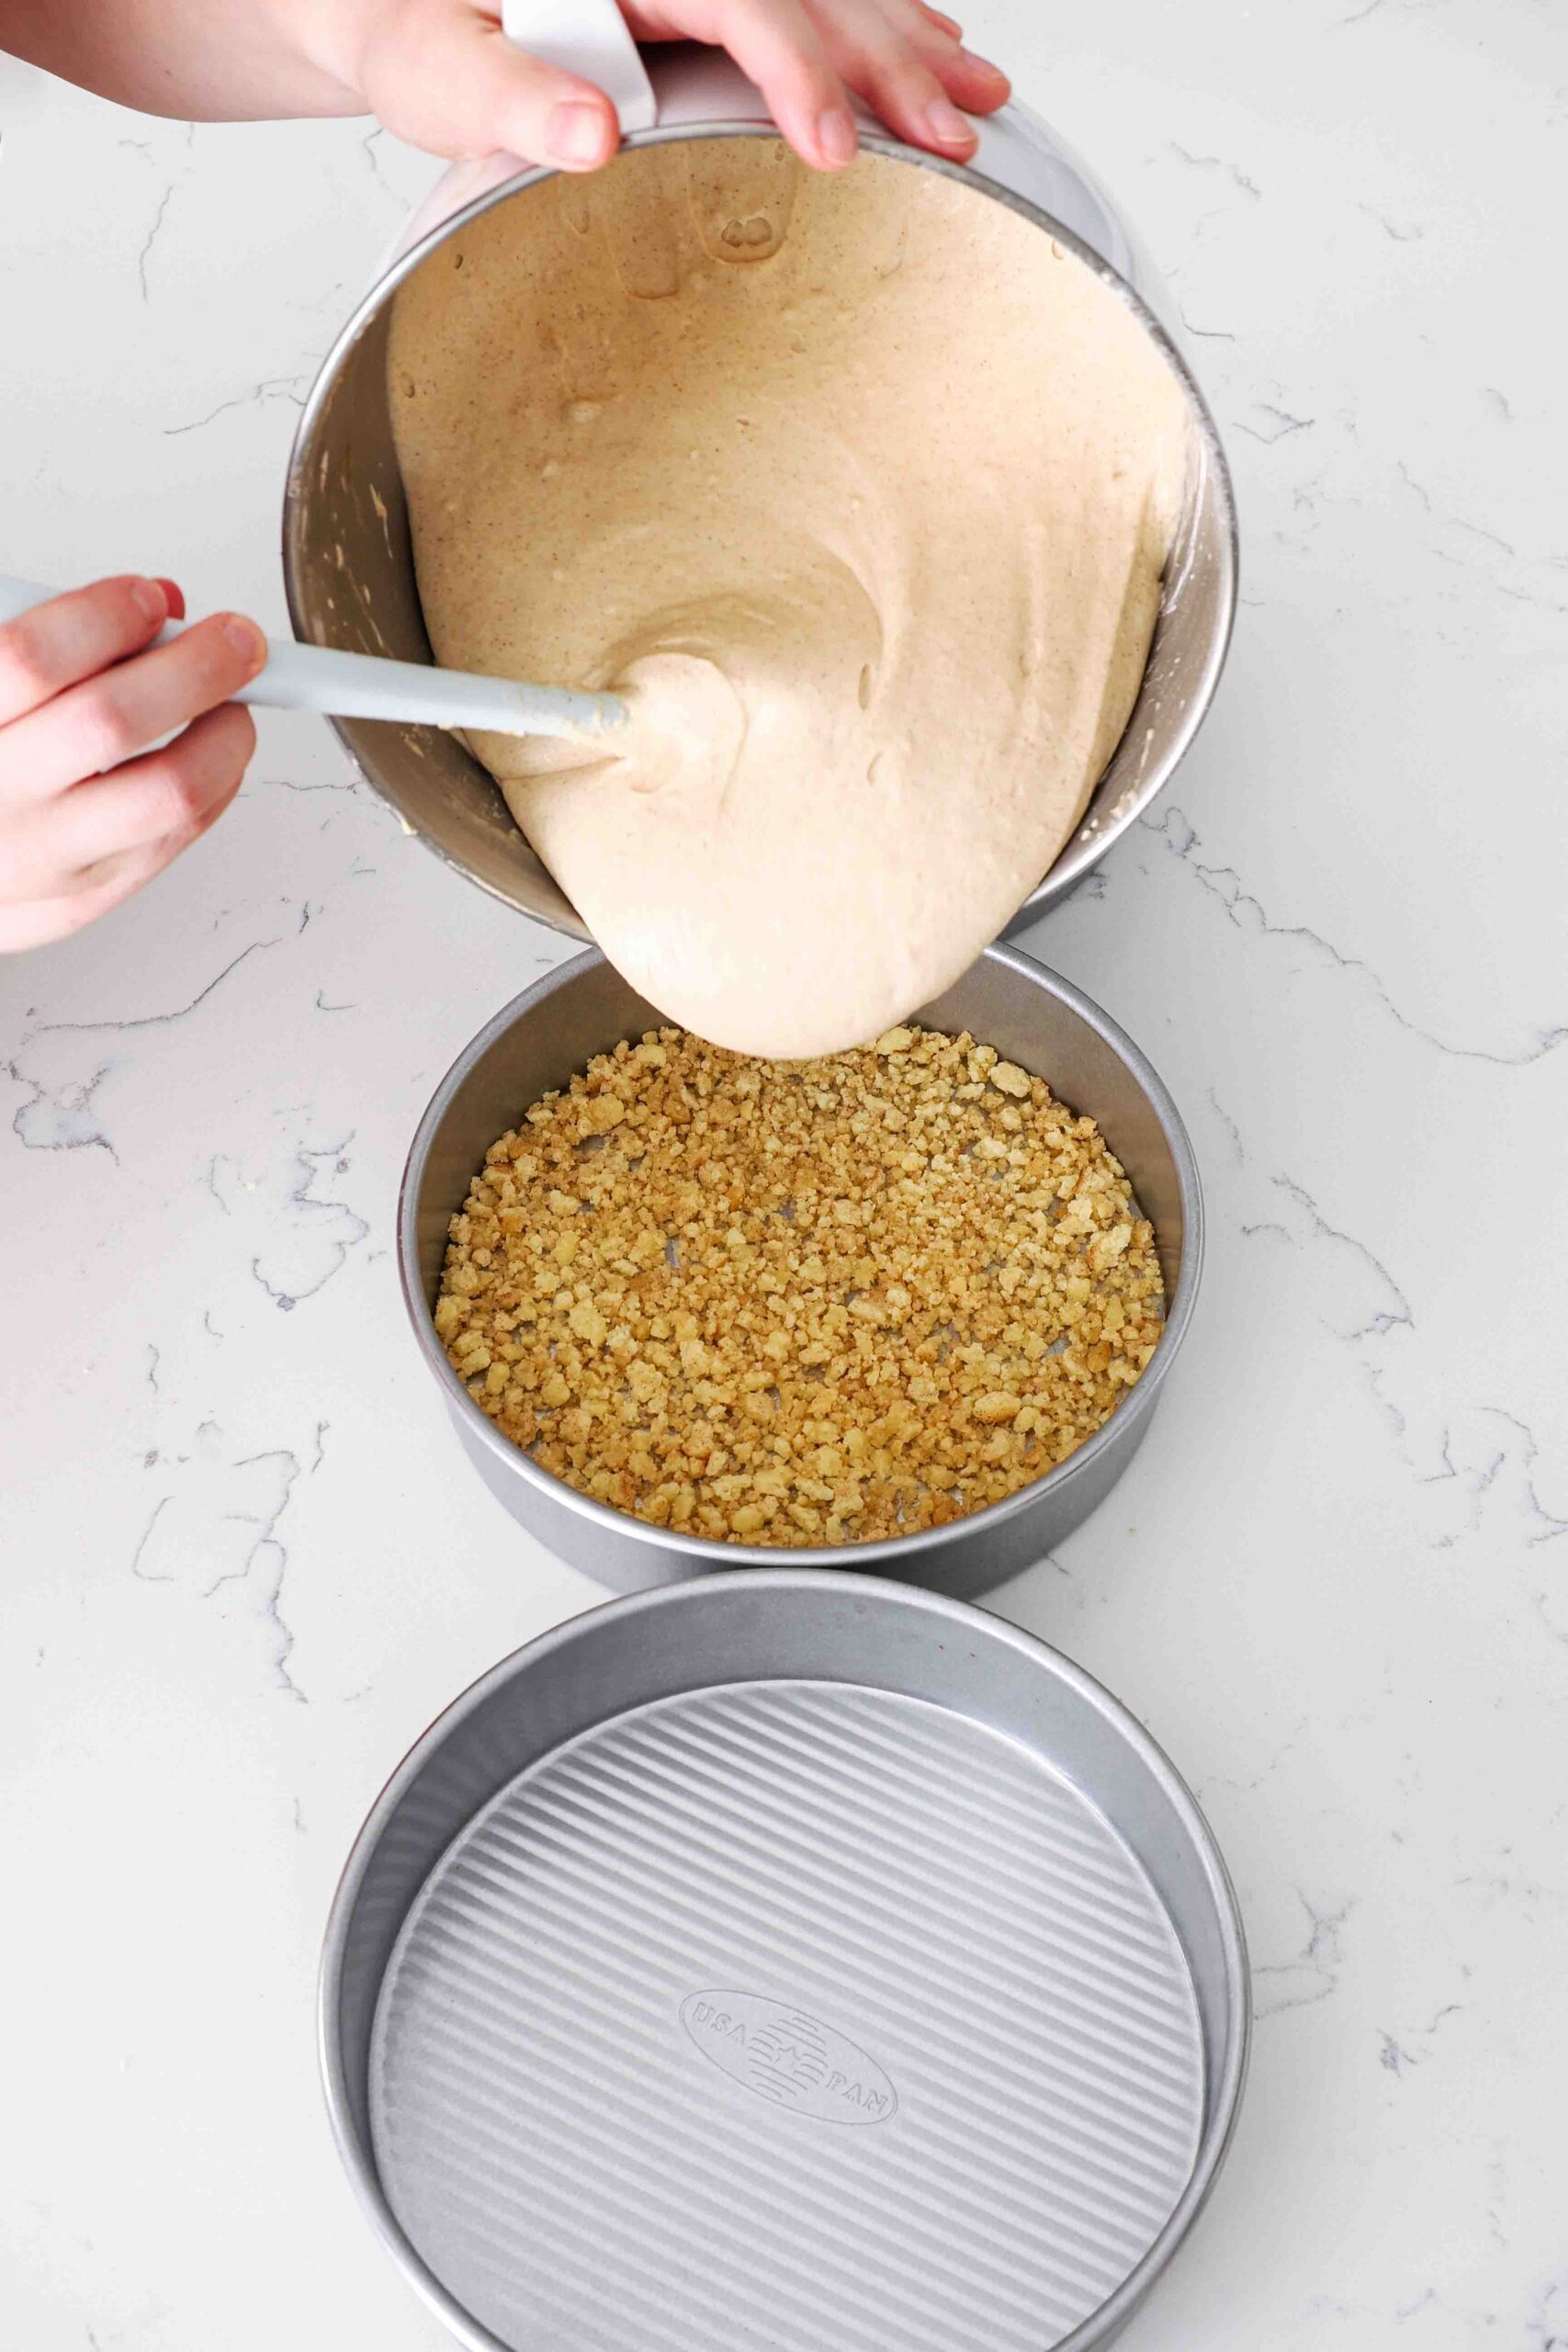 Cinnamon cake batter is poured into 8-inch cake pans.